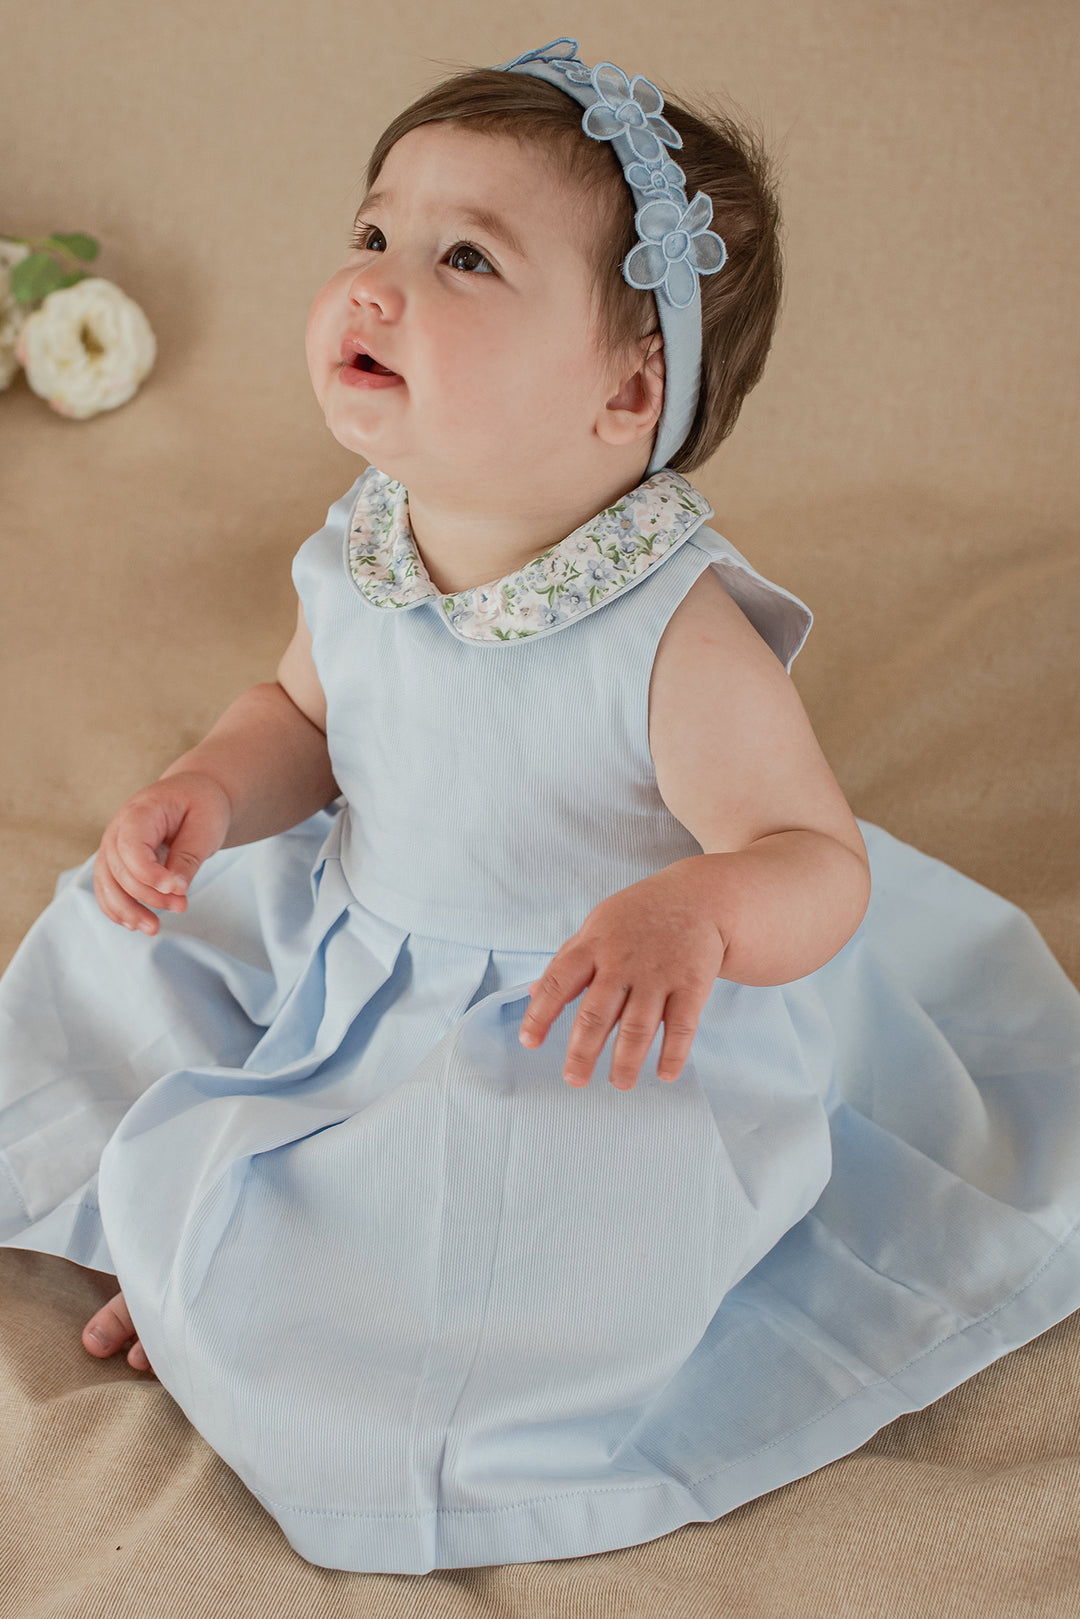 Coccodè "Rosaline" Powder Blue Floral Pleated Dress | iphoneandroidapplications